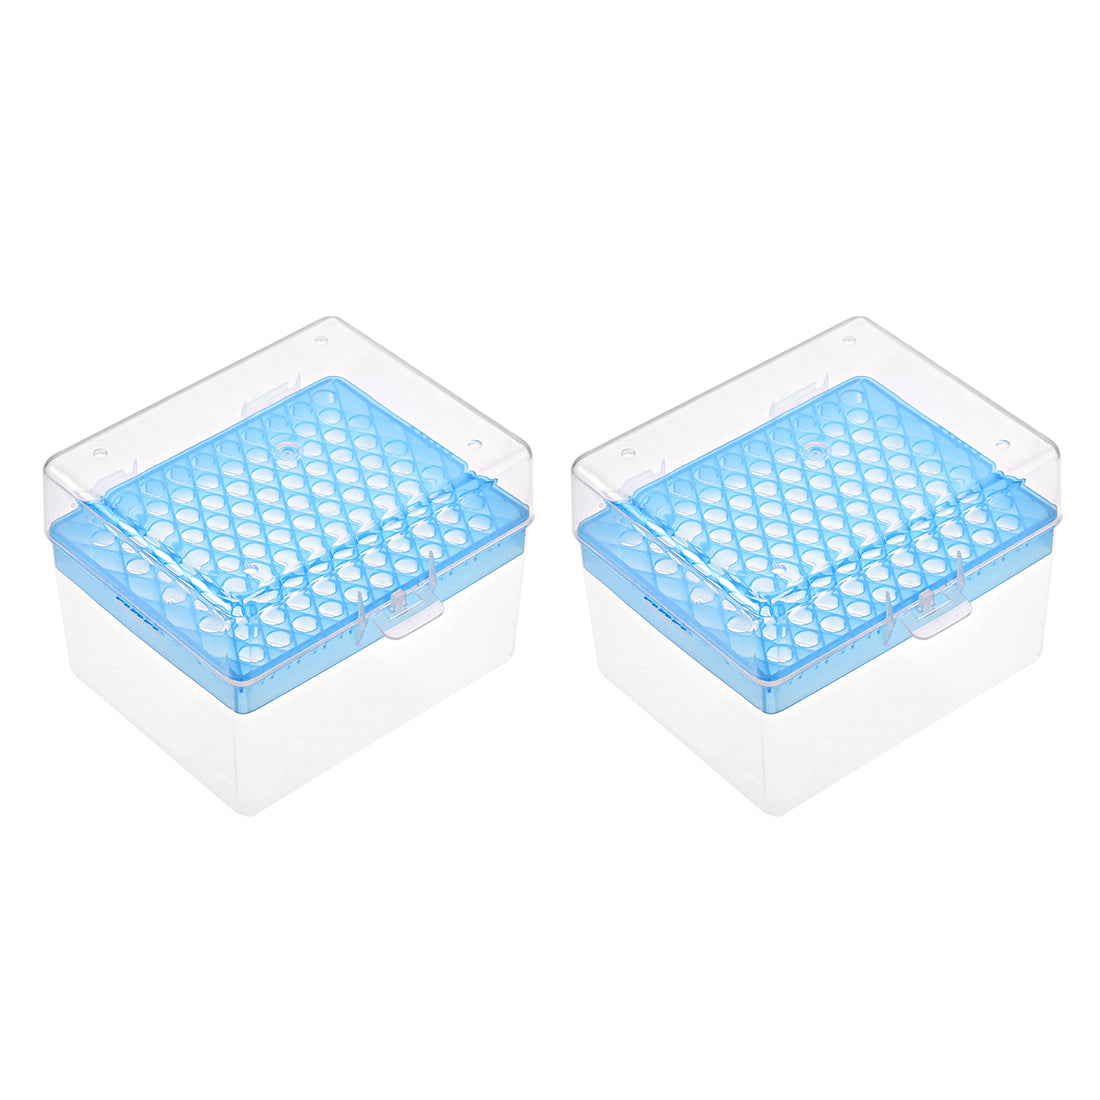 uxcell Uxcell Pipette Tips Box 100-Well Polypropylene Tip Holder Container for 1ml /1000ul Pipettor 8.5mm Hole Diameter 2Pcs